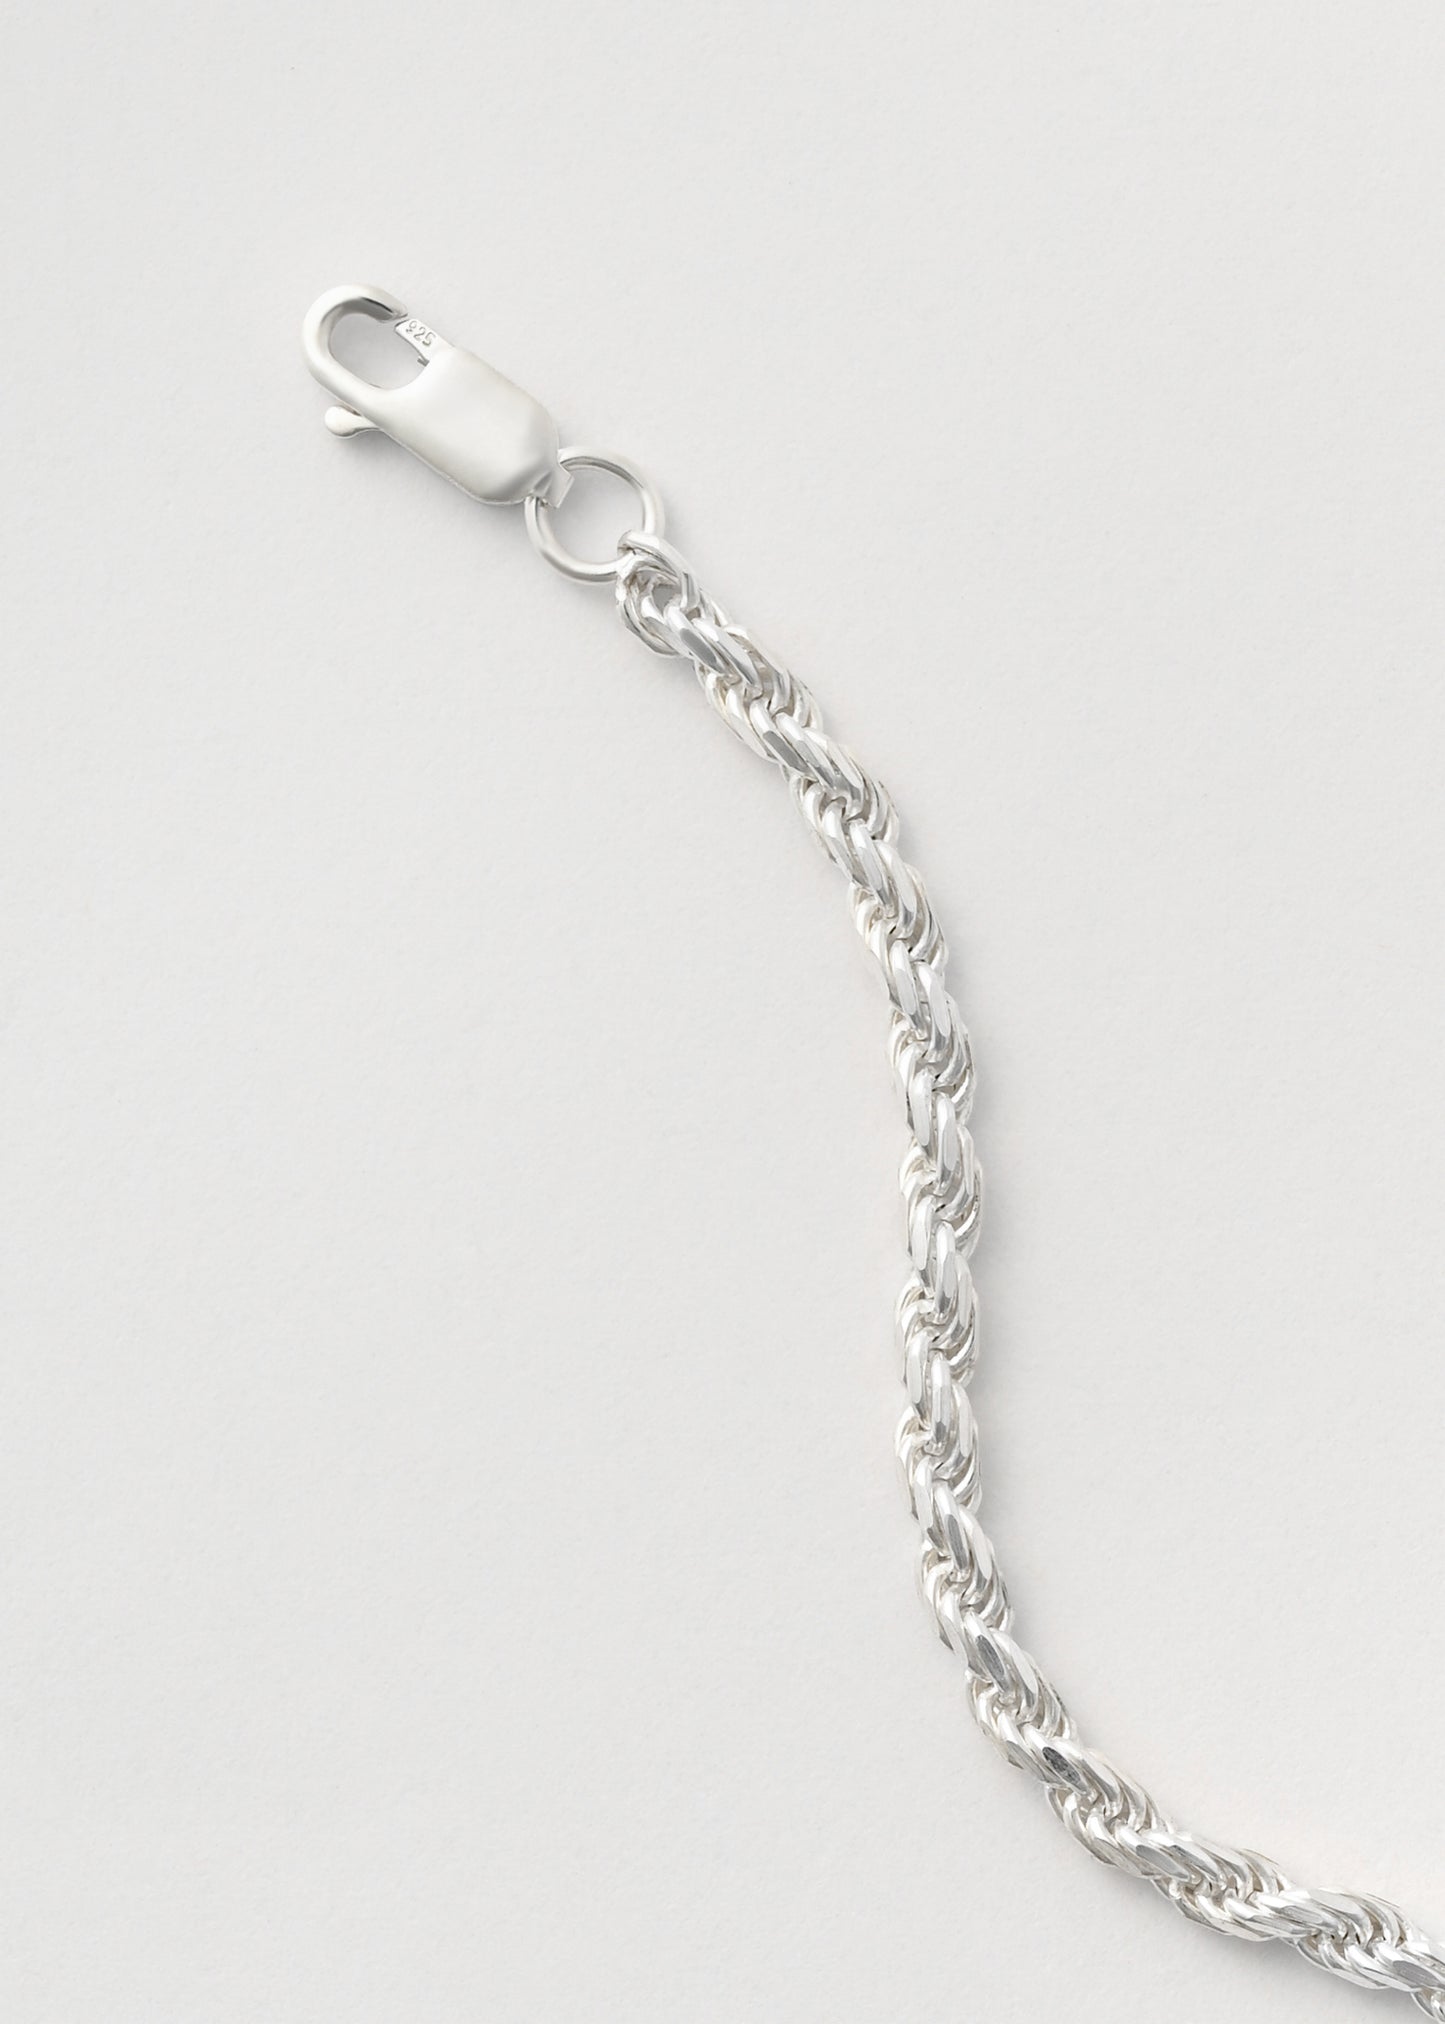 Silver Cordell Necklace 3mm